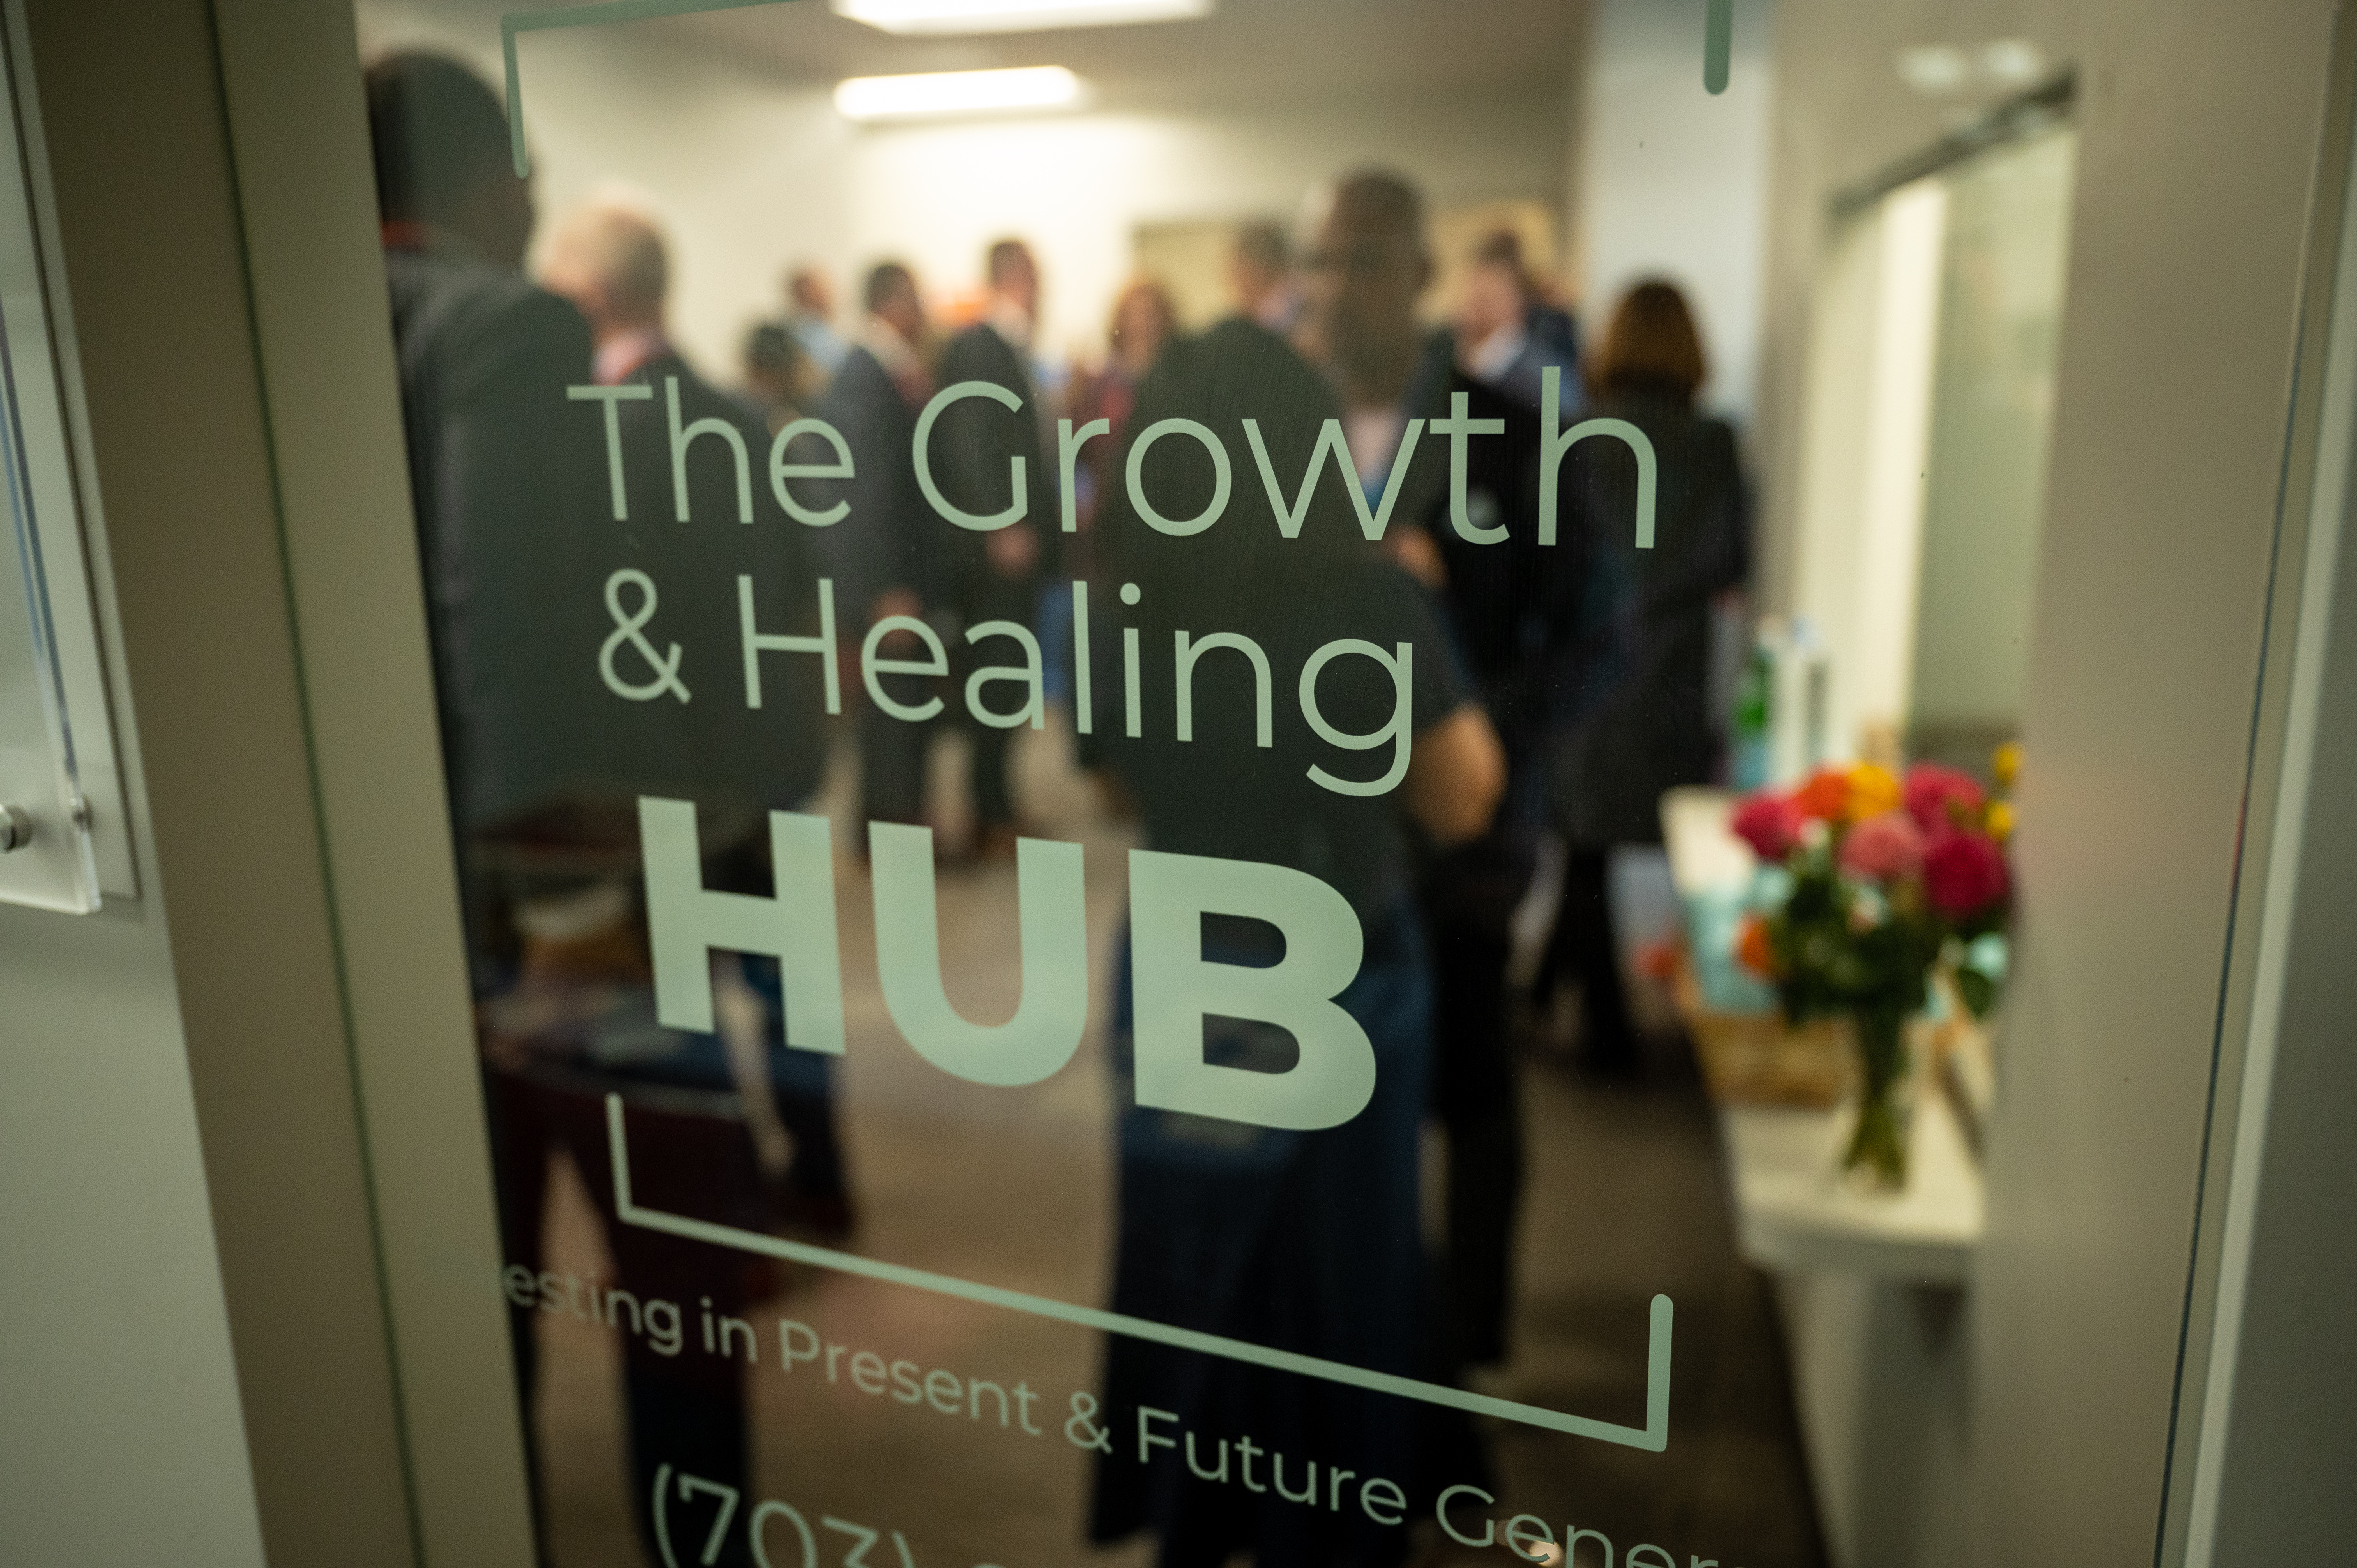 Entrance to the Growth & Healing Hub 